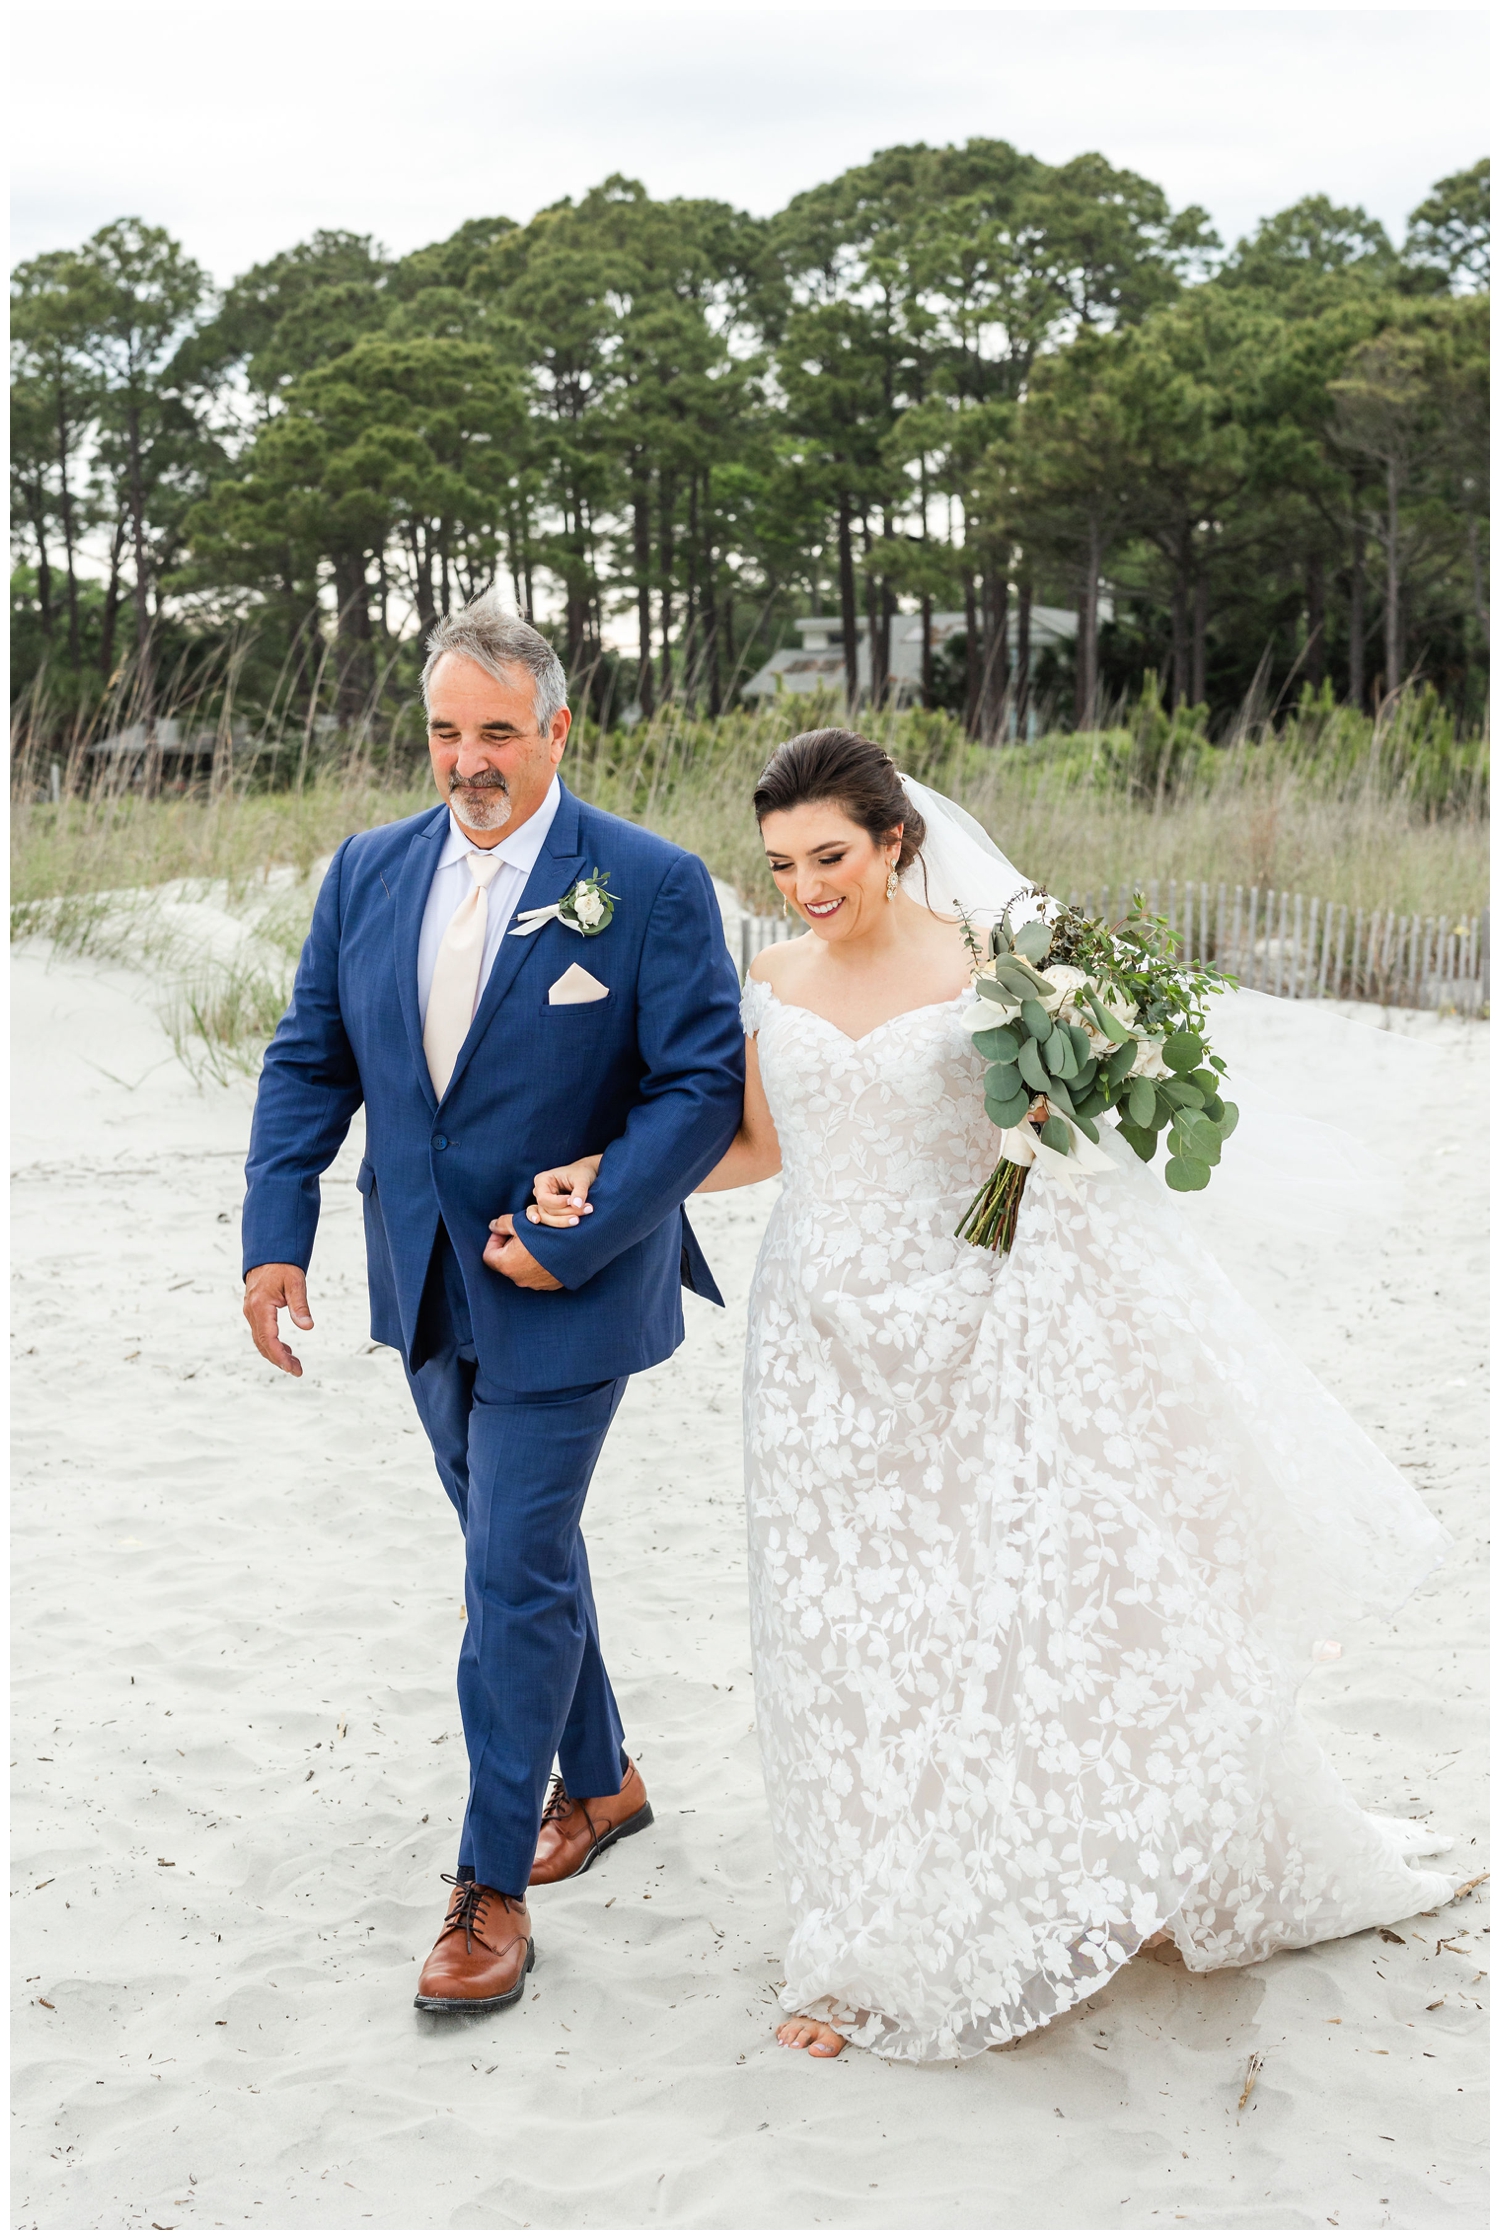 father walking bride down the aisle at intimate Hilton Head wedding